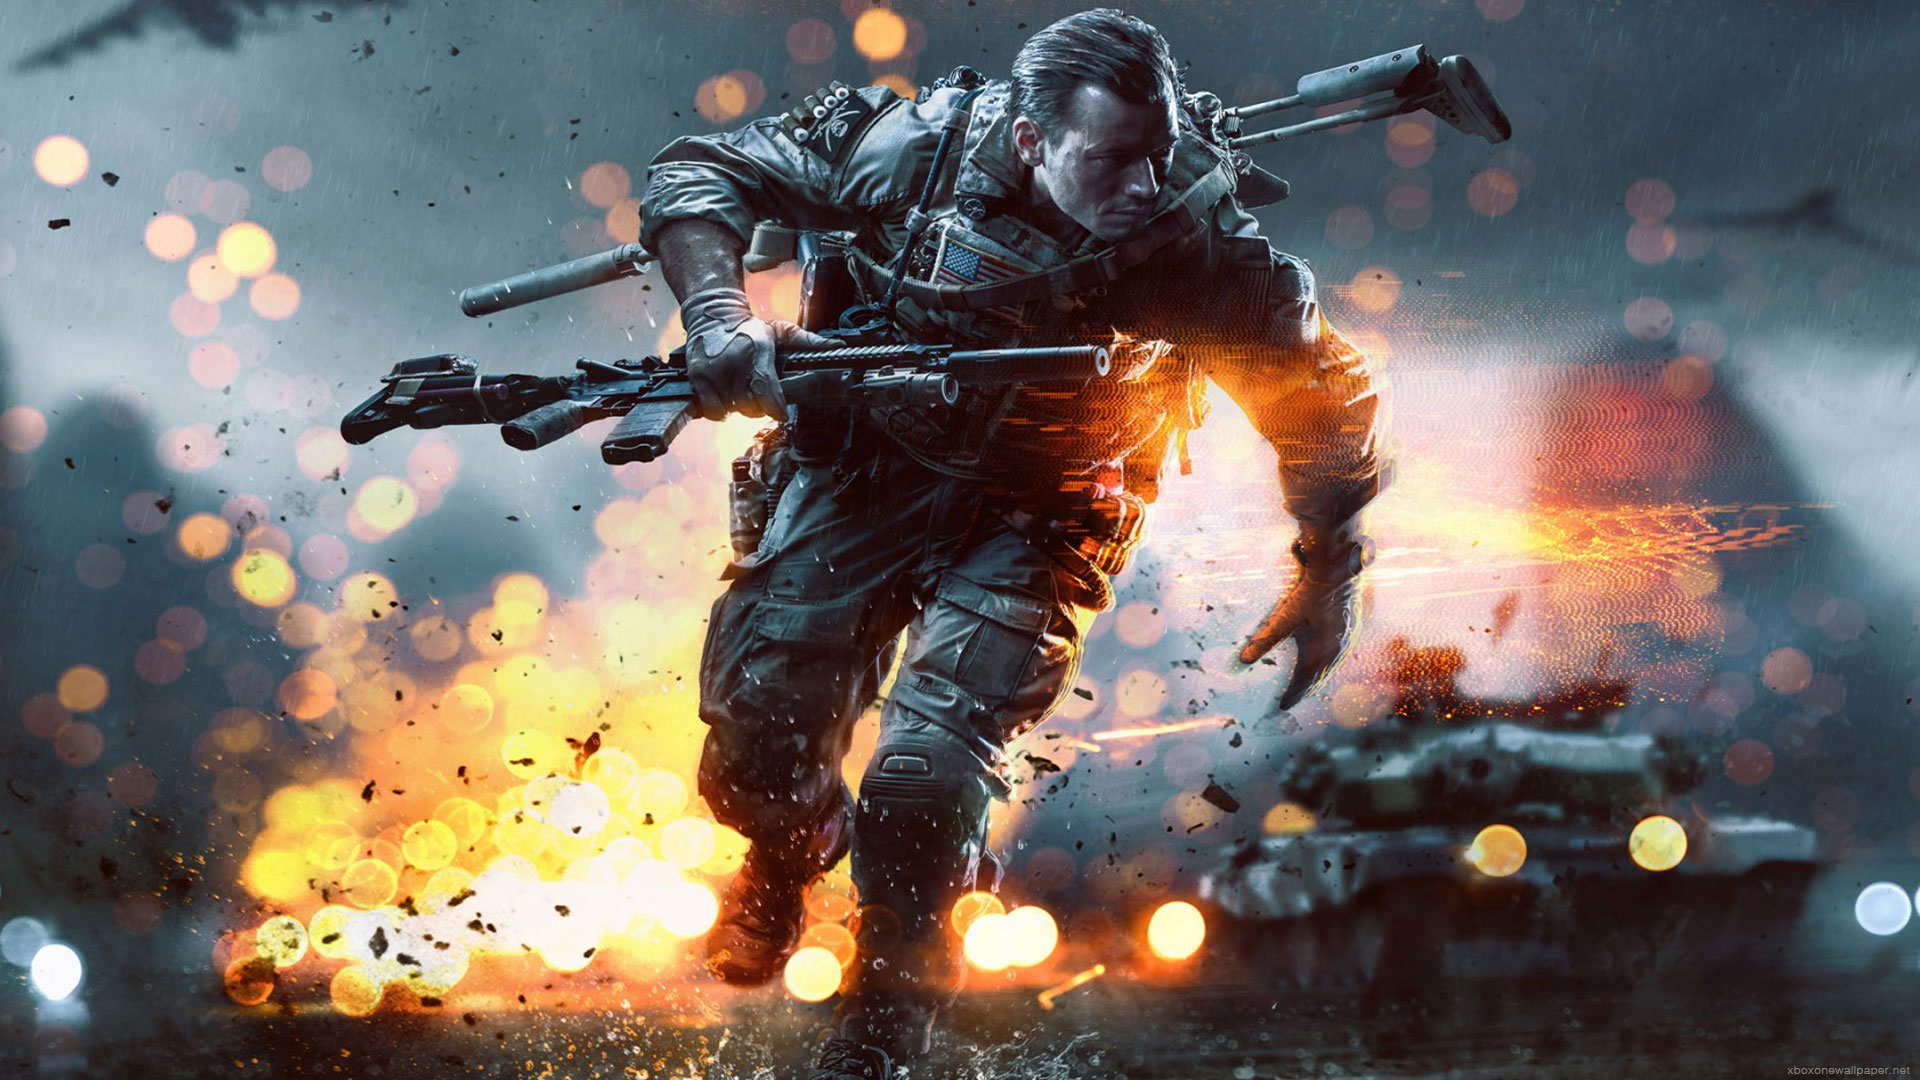 download battlefield 4 xbox one for free